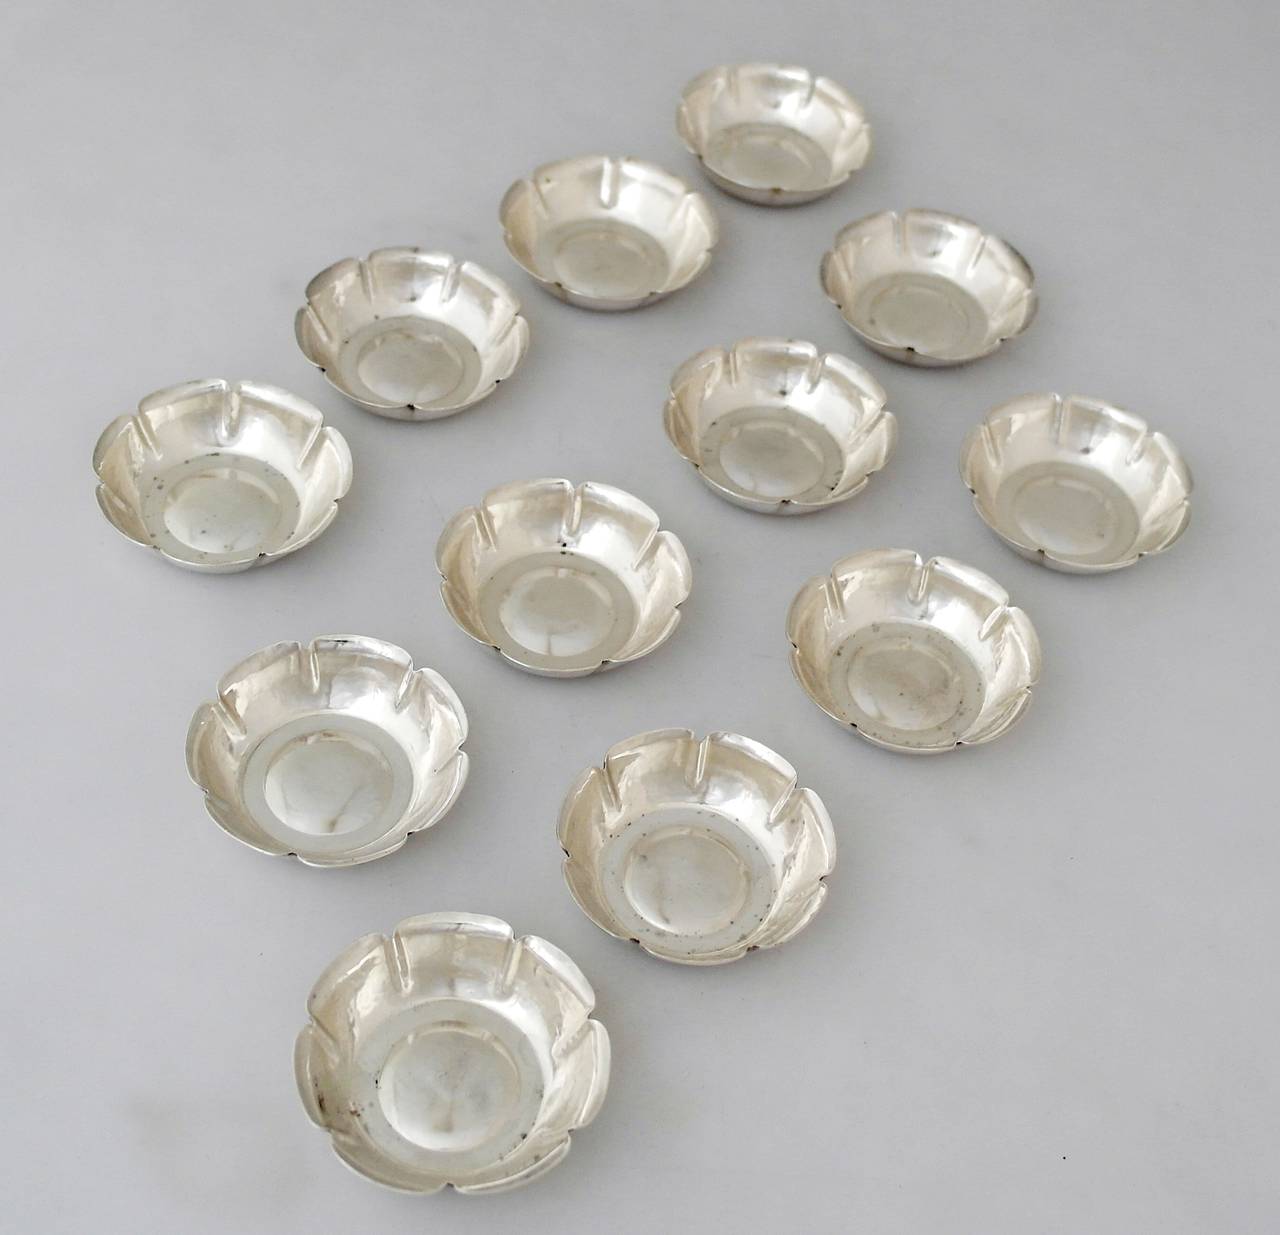 Being offered are a set of 12 circa 1920 nut or mint or wasabi dishes by Joel Hewes of Titusville, Pennsylvania. Entirely hand-wrought, lobed dishes made by a prominent and collecteded silversmith during the Arts & Crafts movement. Dimensions:  2